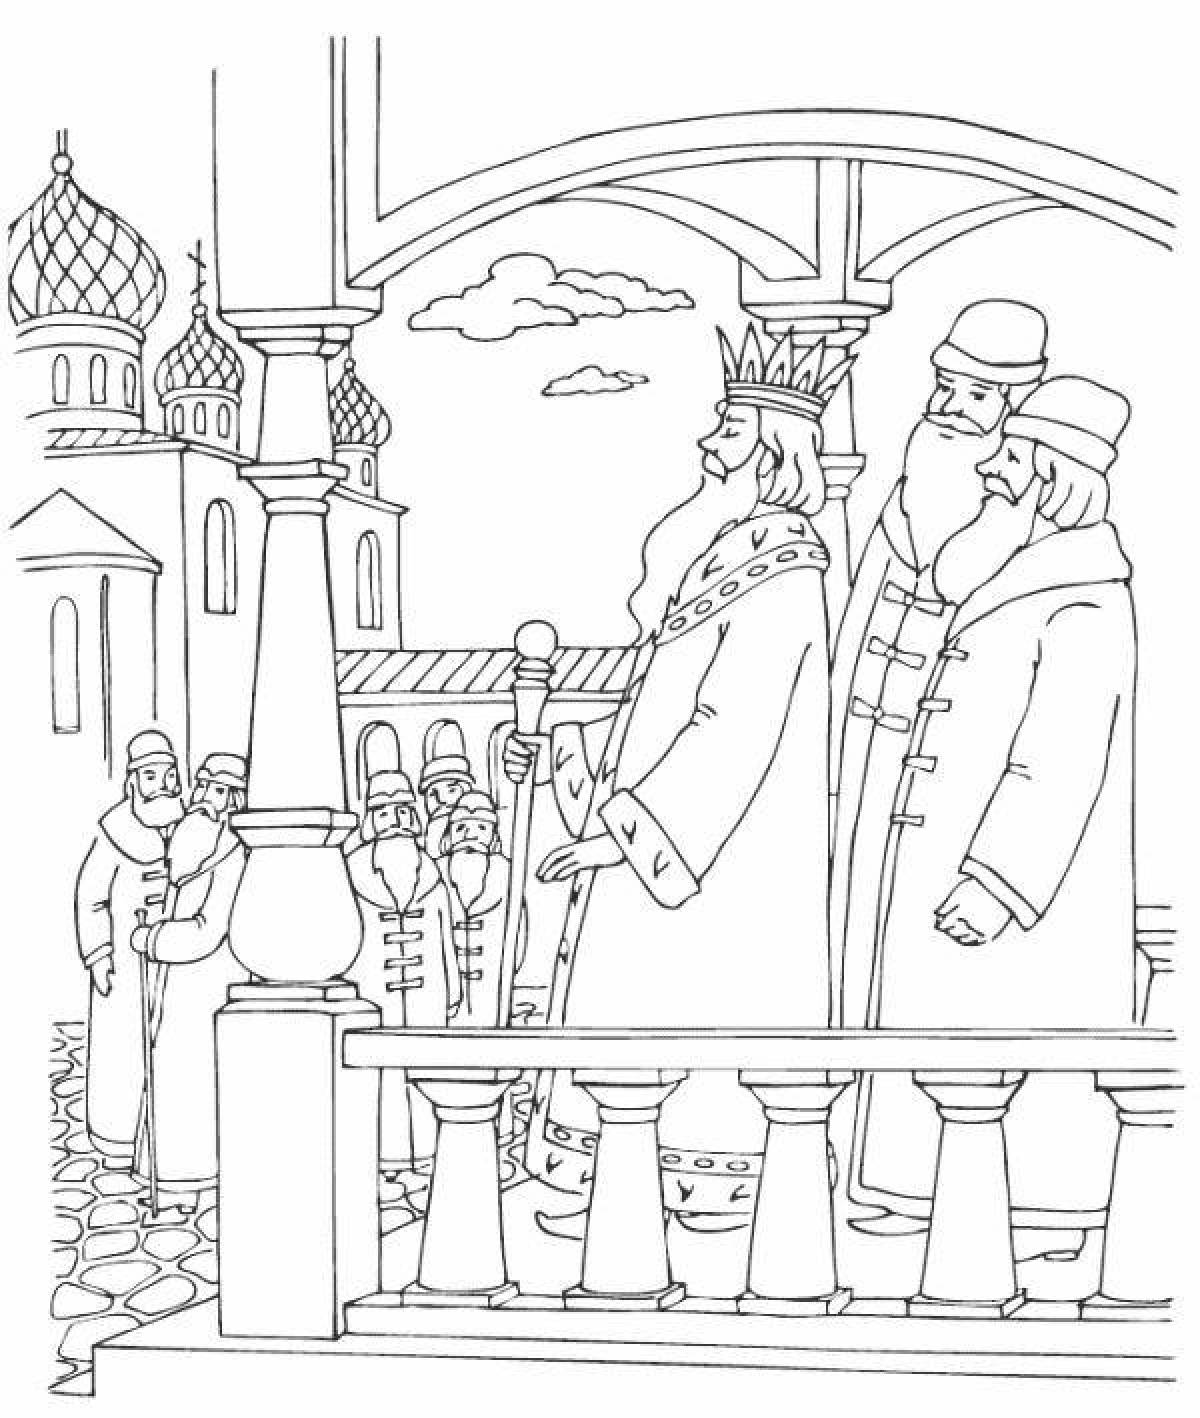 Charming coloring illustration for the fairy tale about Tsar Saltan